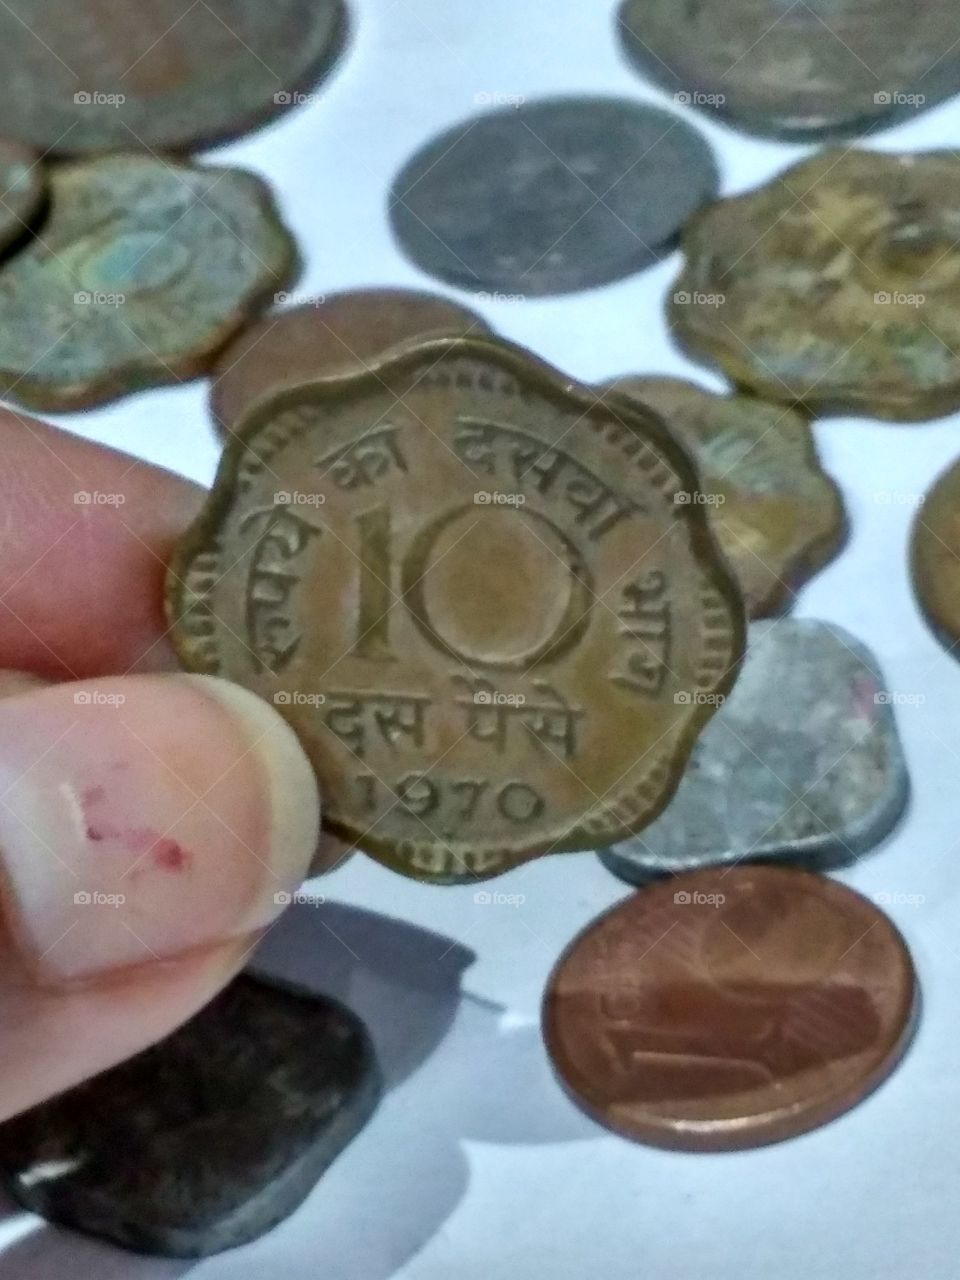 coins back then